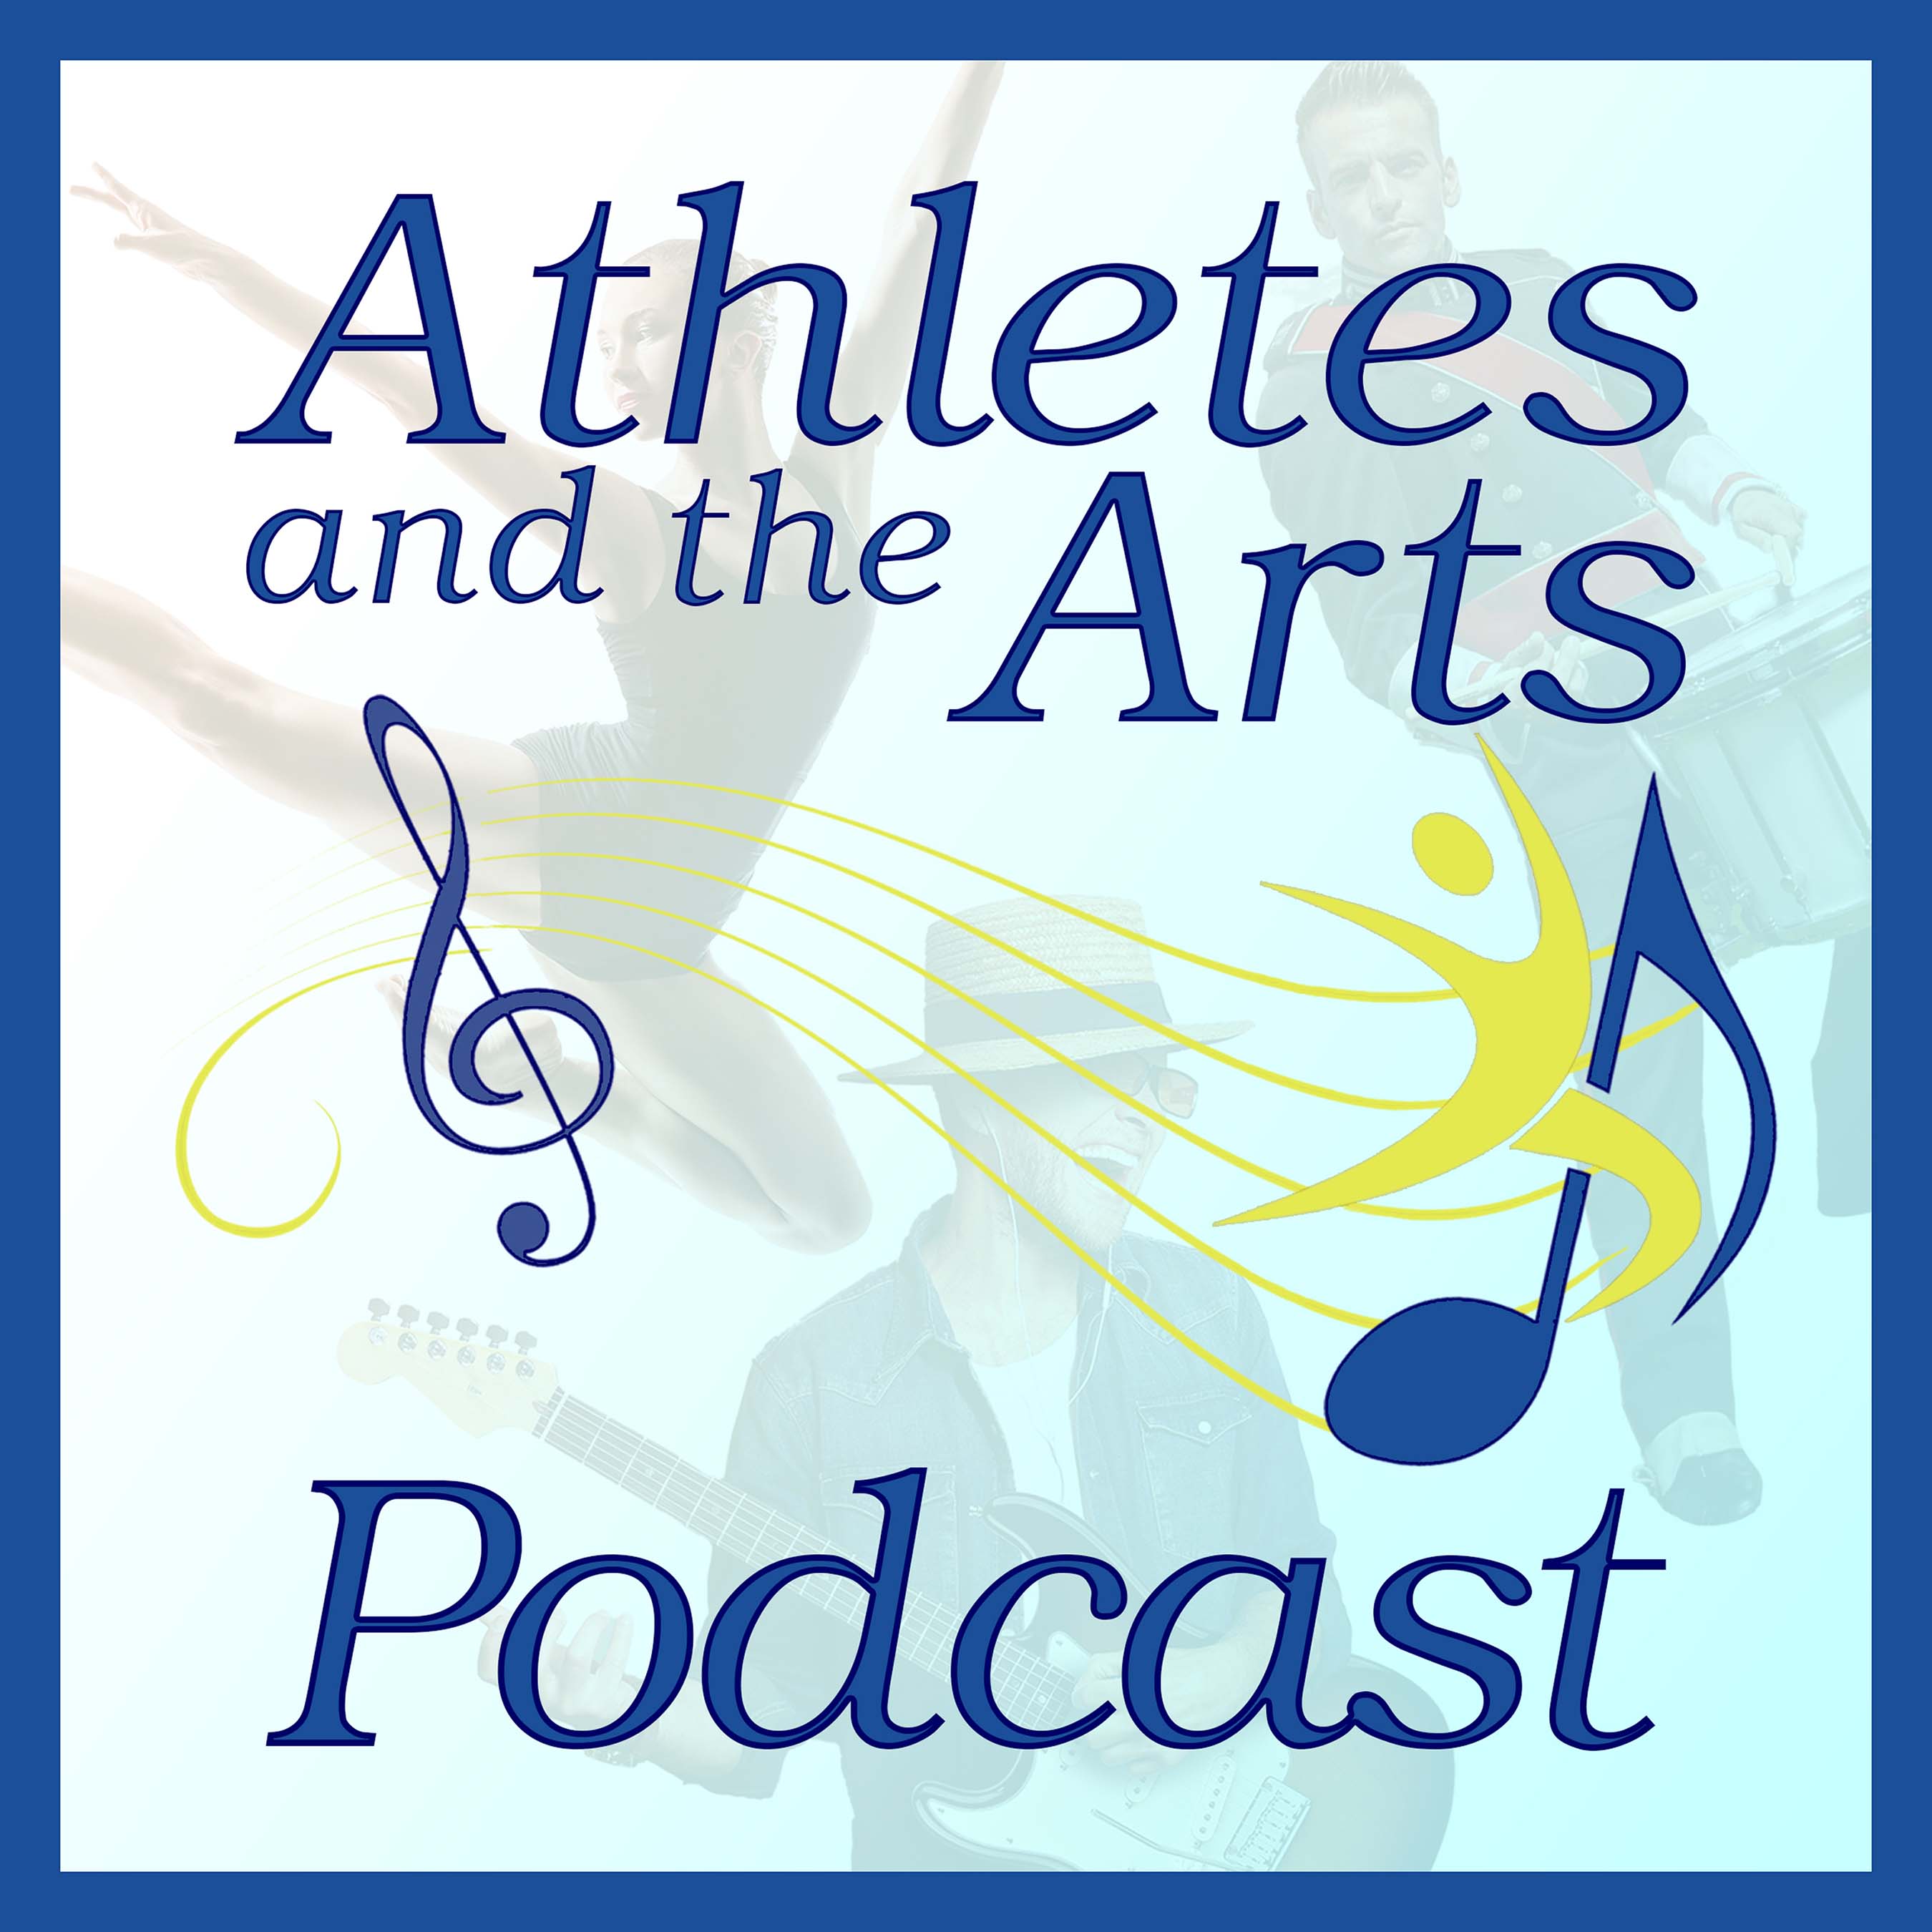 Artwork for Athletes and the Arts